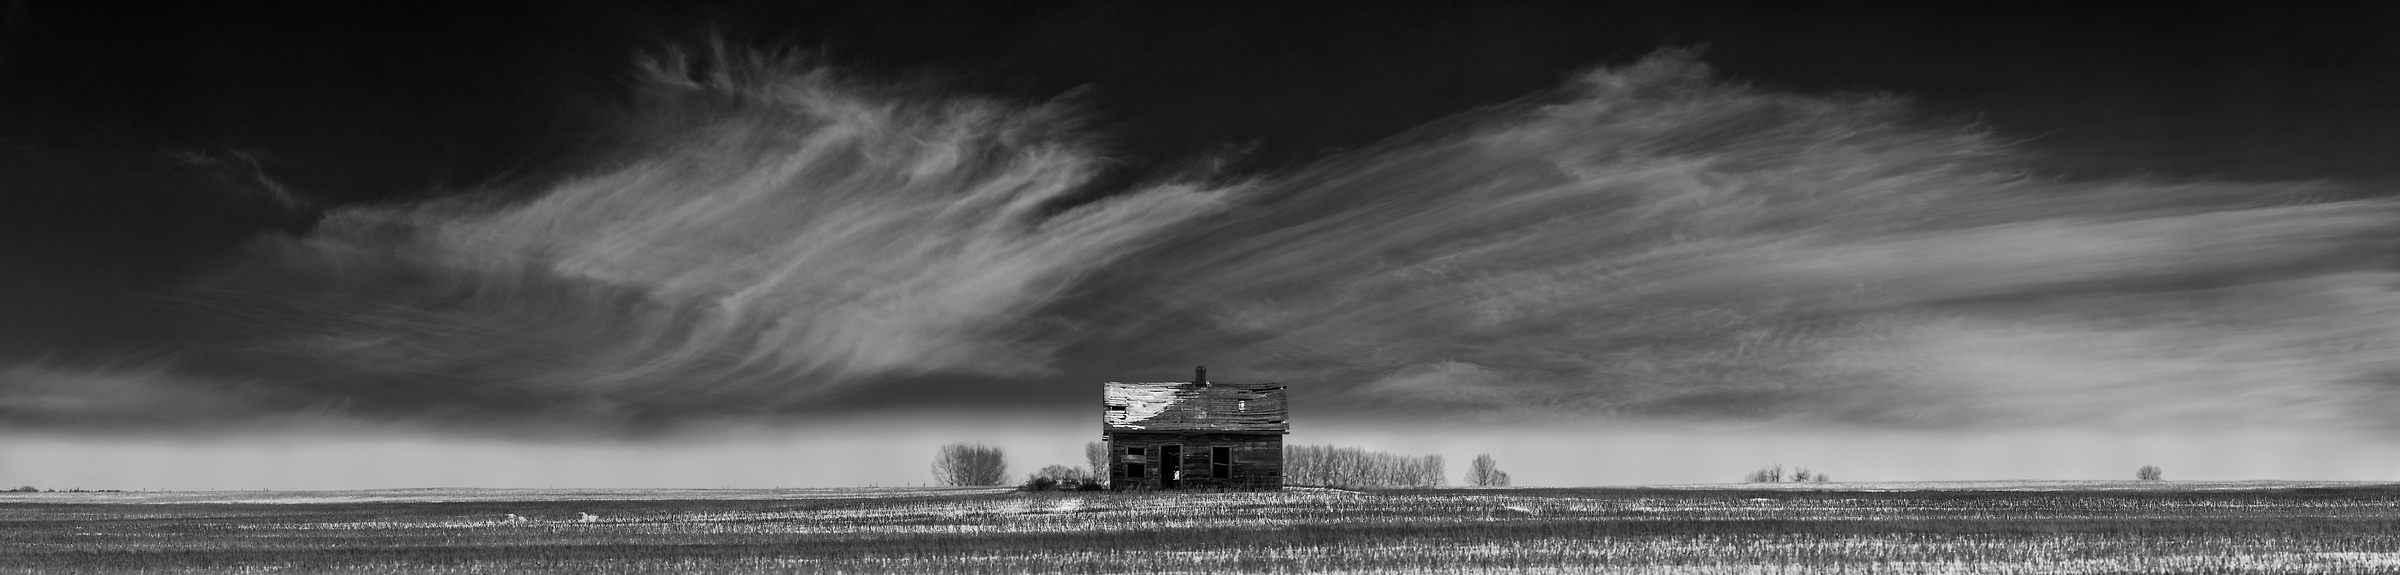 1,647 megapixels! A very high resolution, black and white VAST photo print of an abandoned house on a prairie with snow; landscape photograph created by Scott Dimond in Wheatland County, Alberta, Canada.